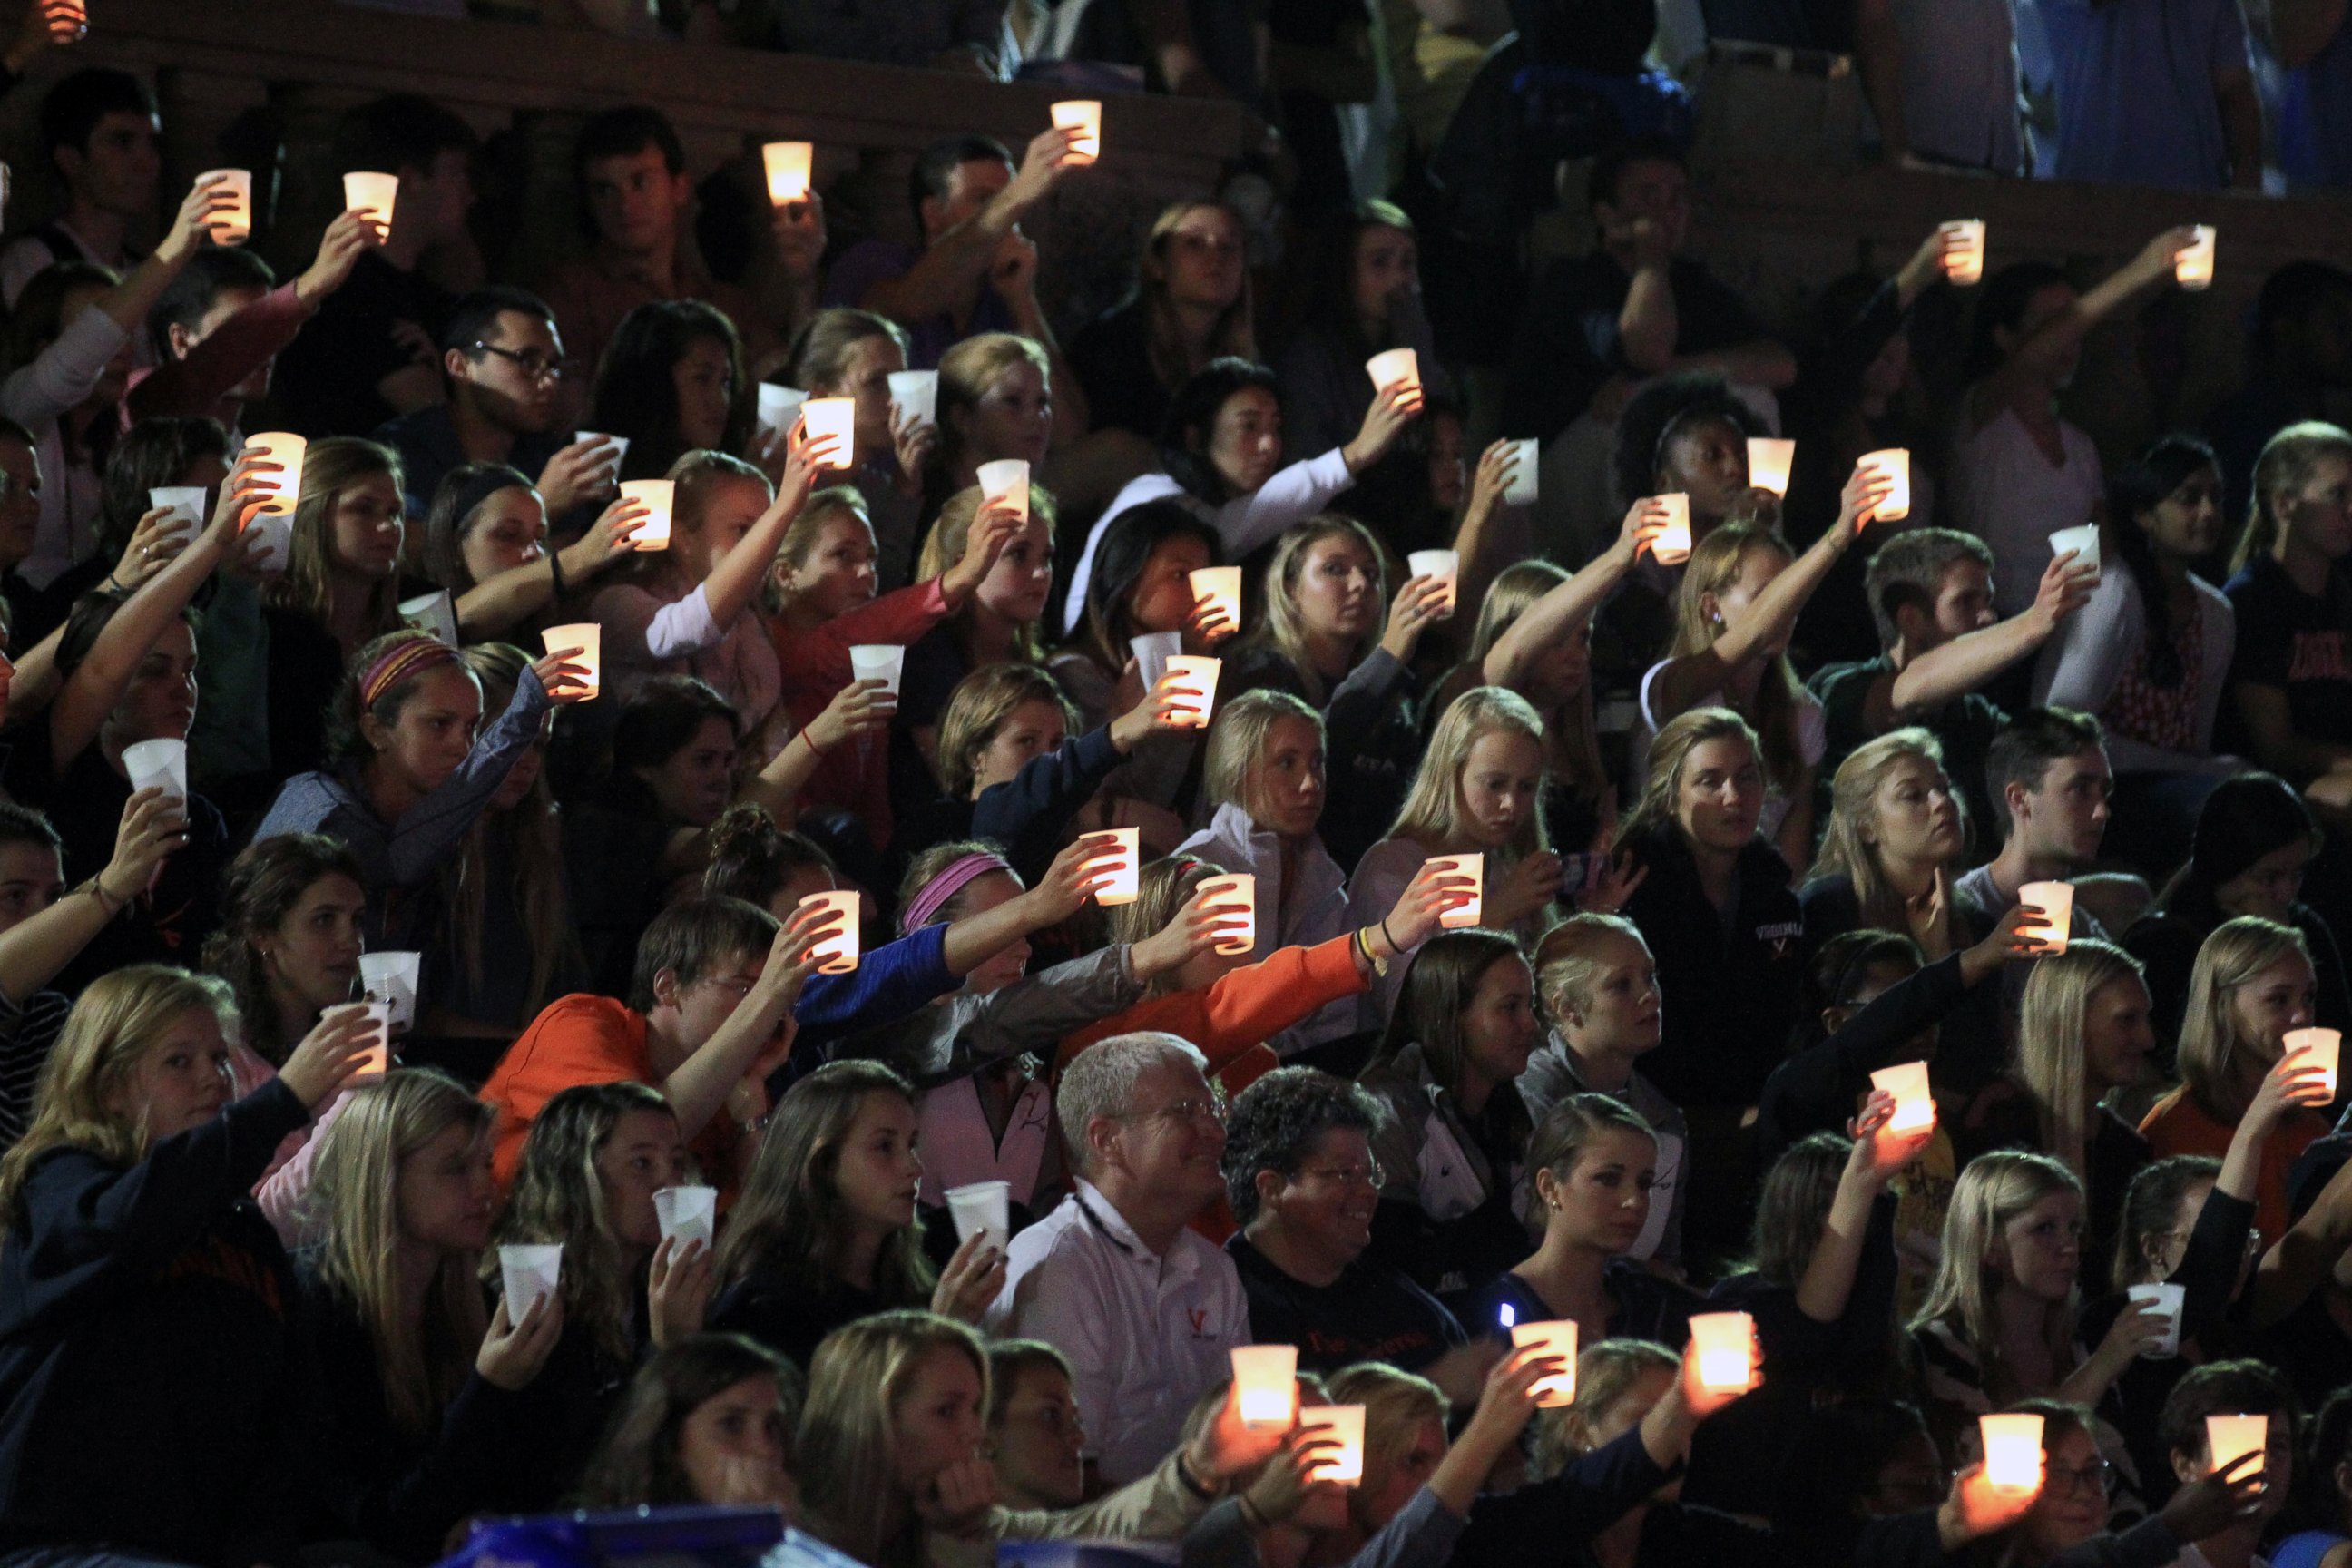 PHOTO: Students, teachers and parents raise their candles in support of missing U.Va. student Hannah Elizabeth during a student led vigil, Sept. 18, 2014, at the University of Virginia in Charlottesville, Va. 